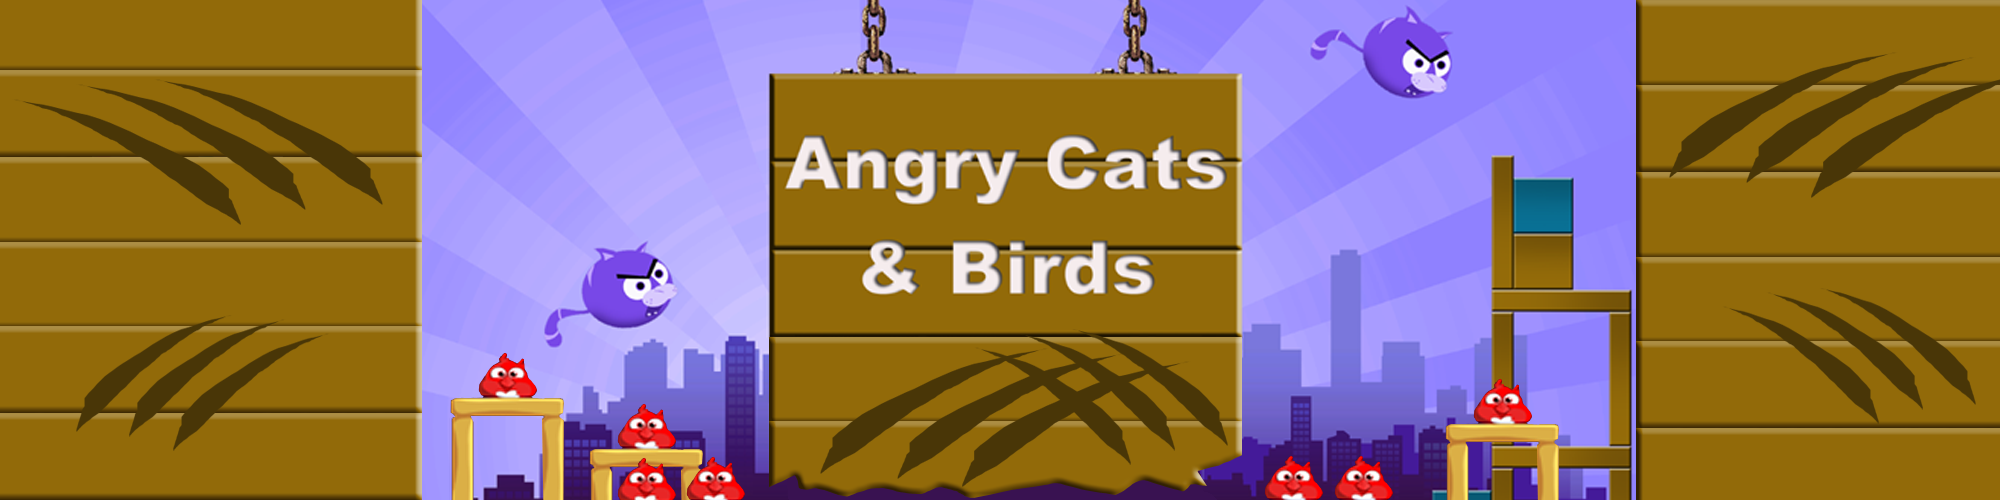 Angry Cats and Birds